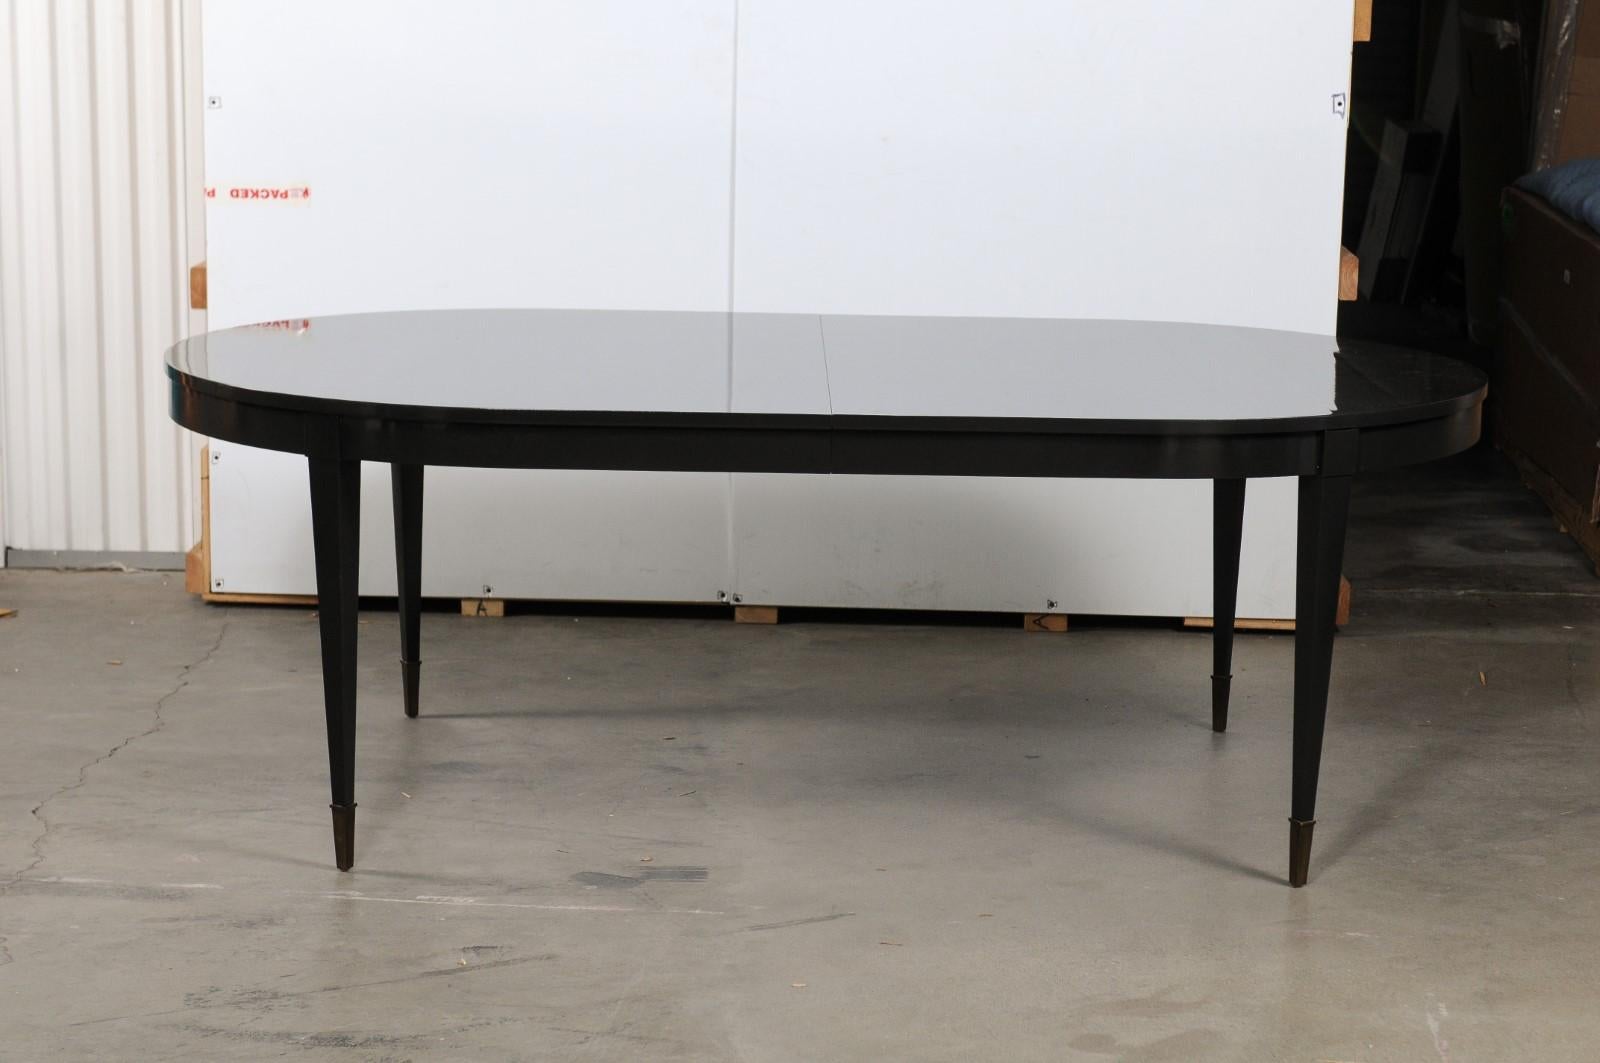 black oval dining table